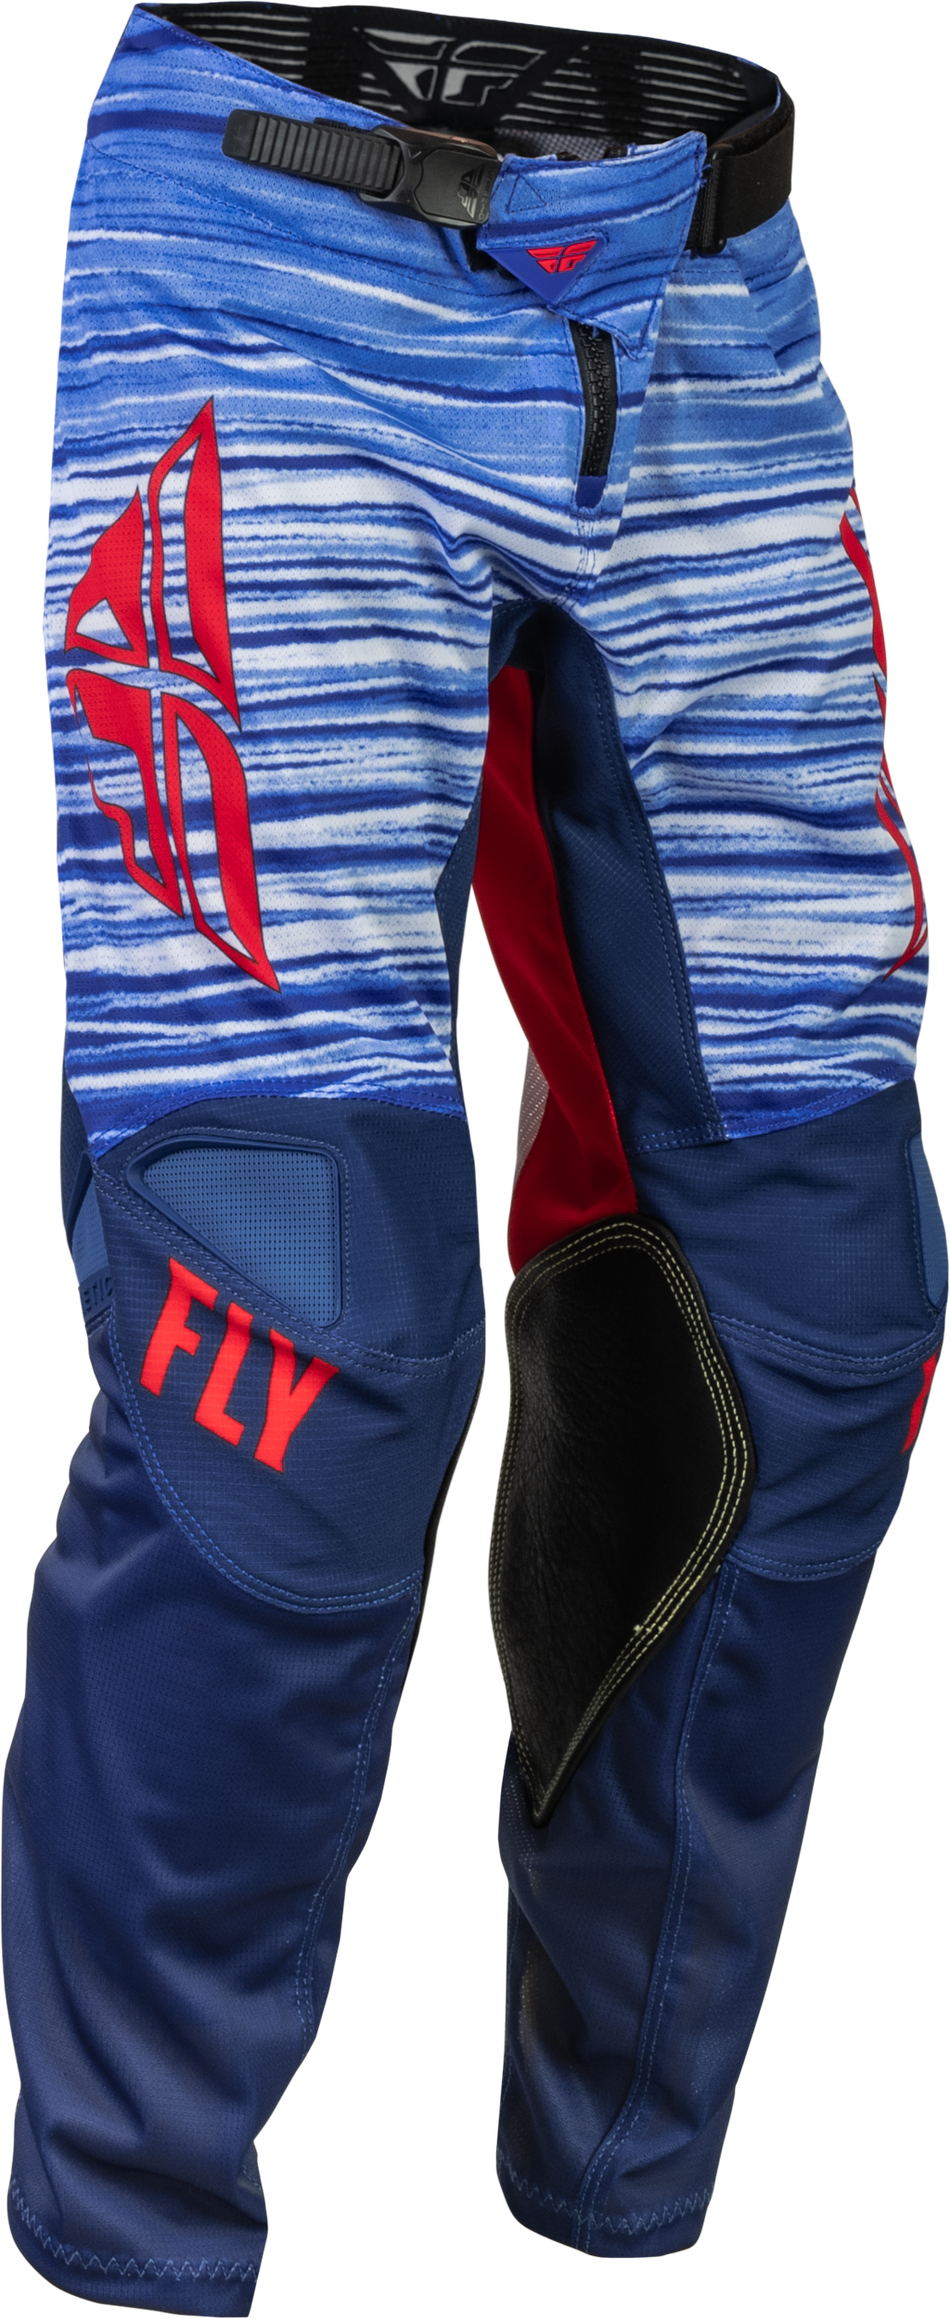 FLY RACING Youth Kinetic Mesh Pants Red/White/Blue Sz 24 376-34424